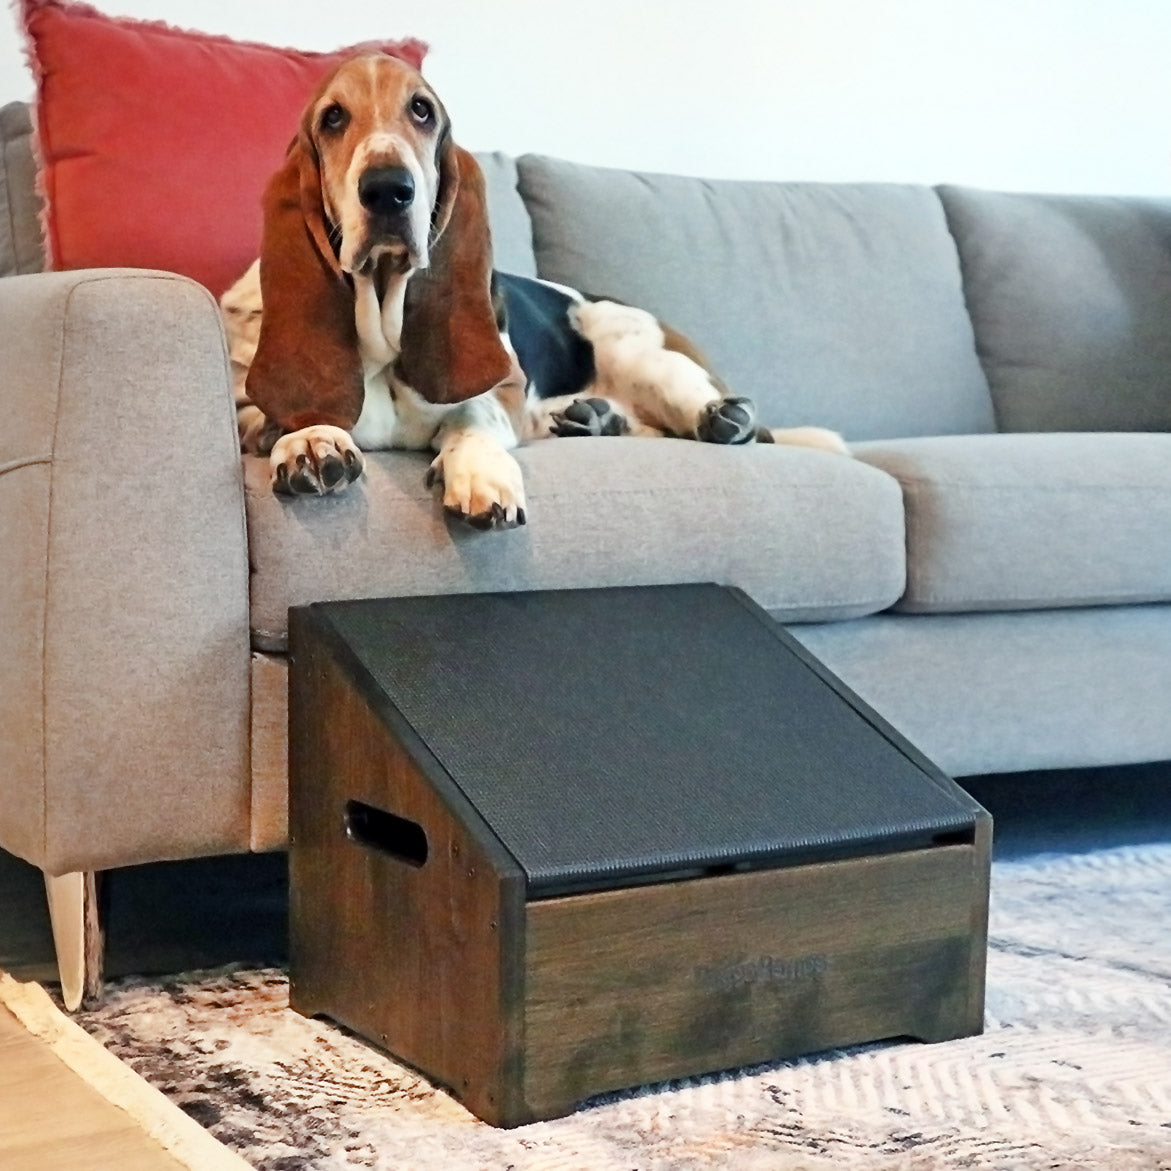 Non-Professional quick doggy on ottoman